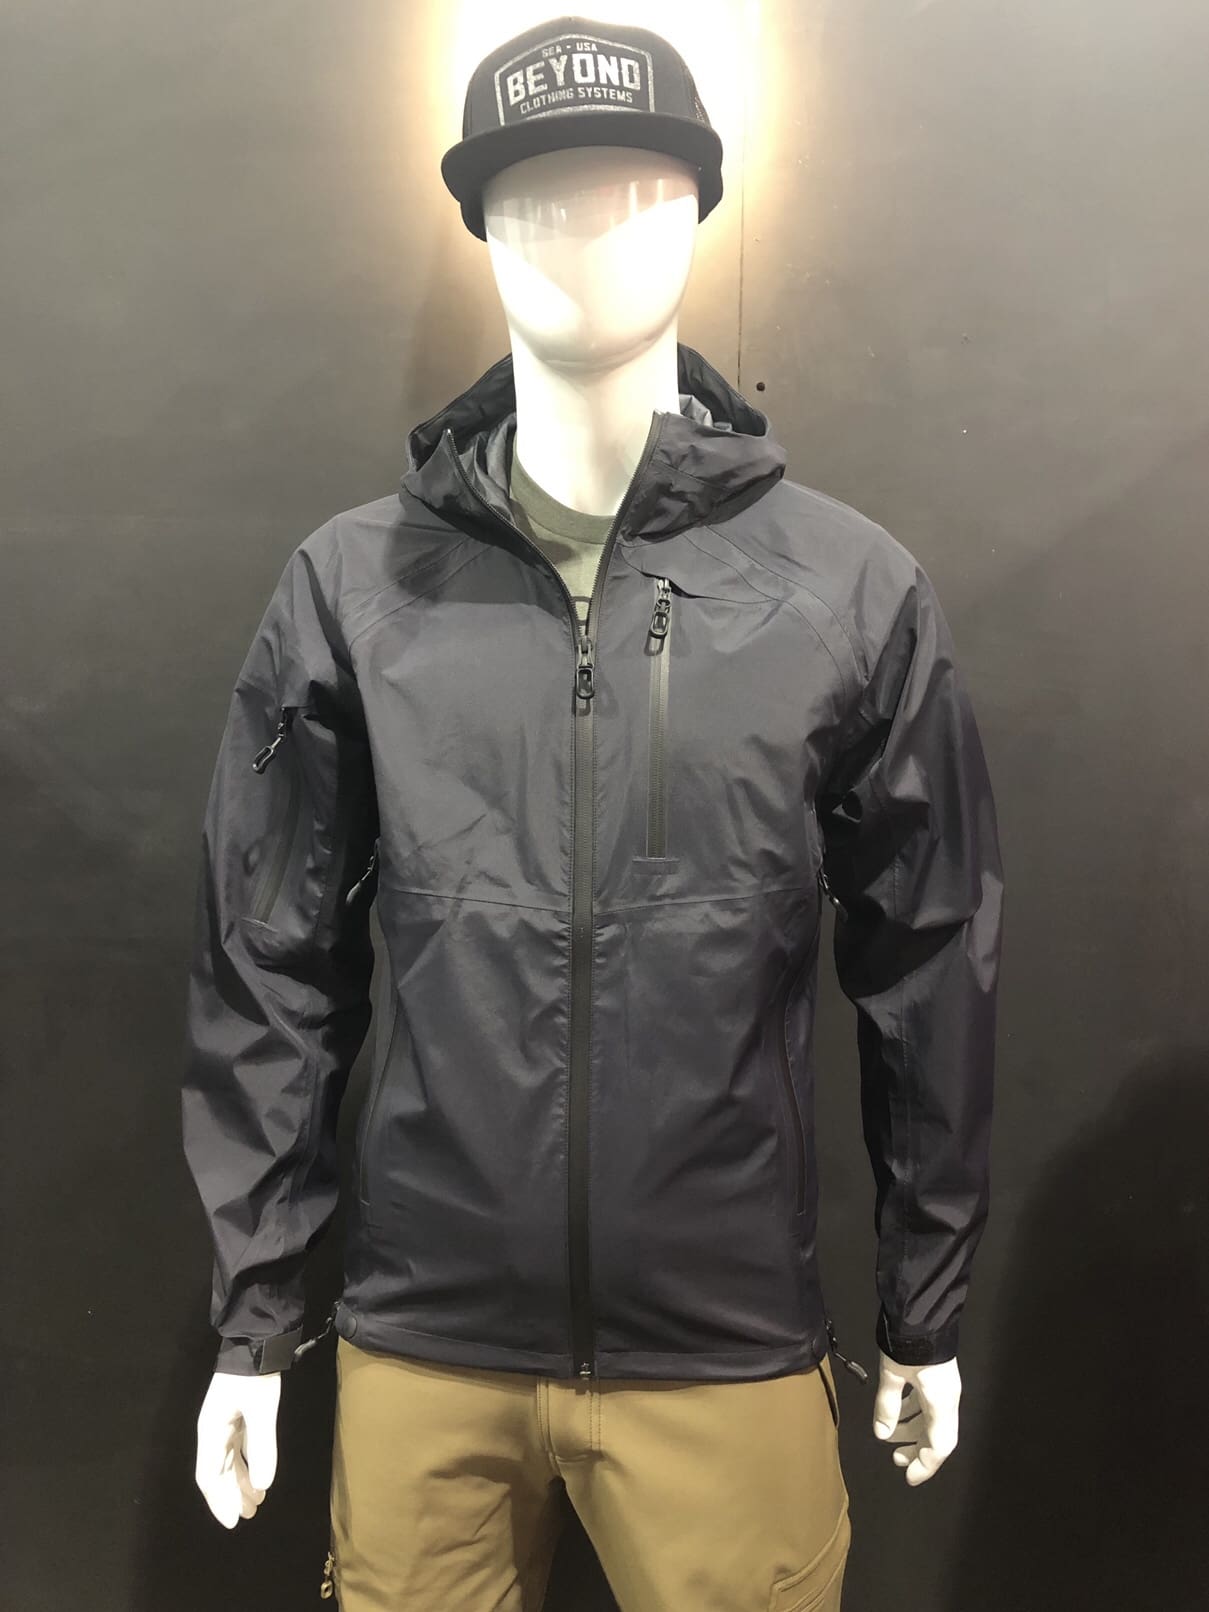 ORWM 18 - Beyond K6 ARX Rain Jacket and Pant - Soldier Systems Daily